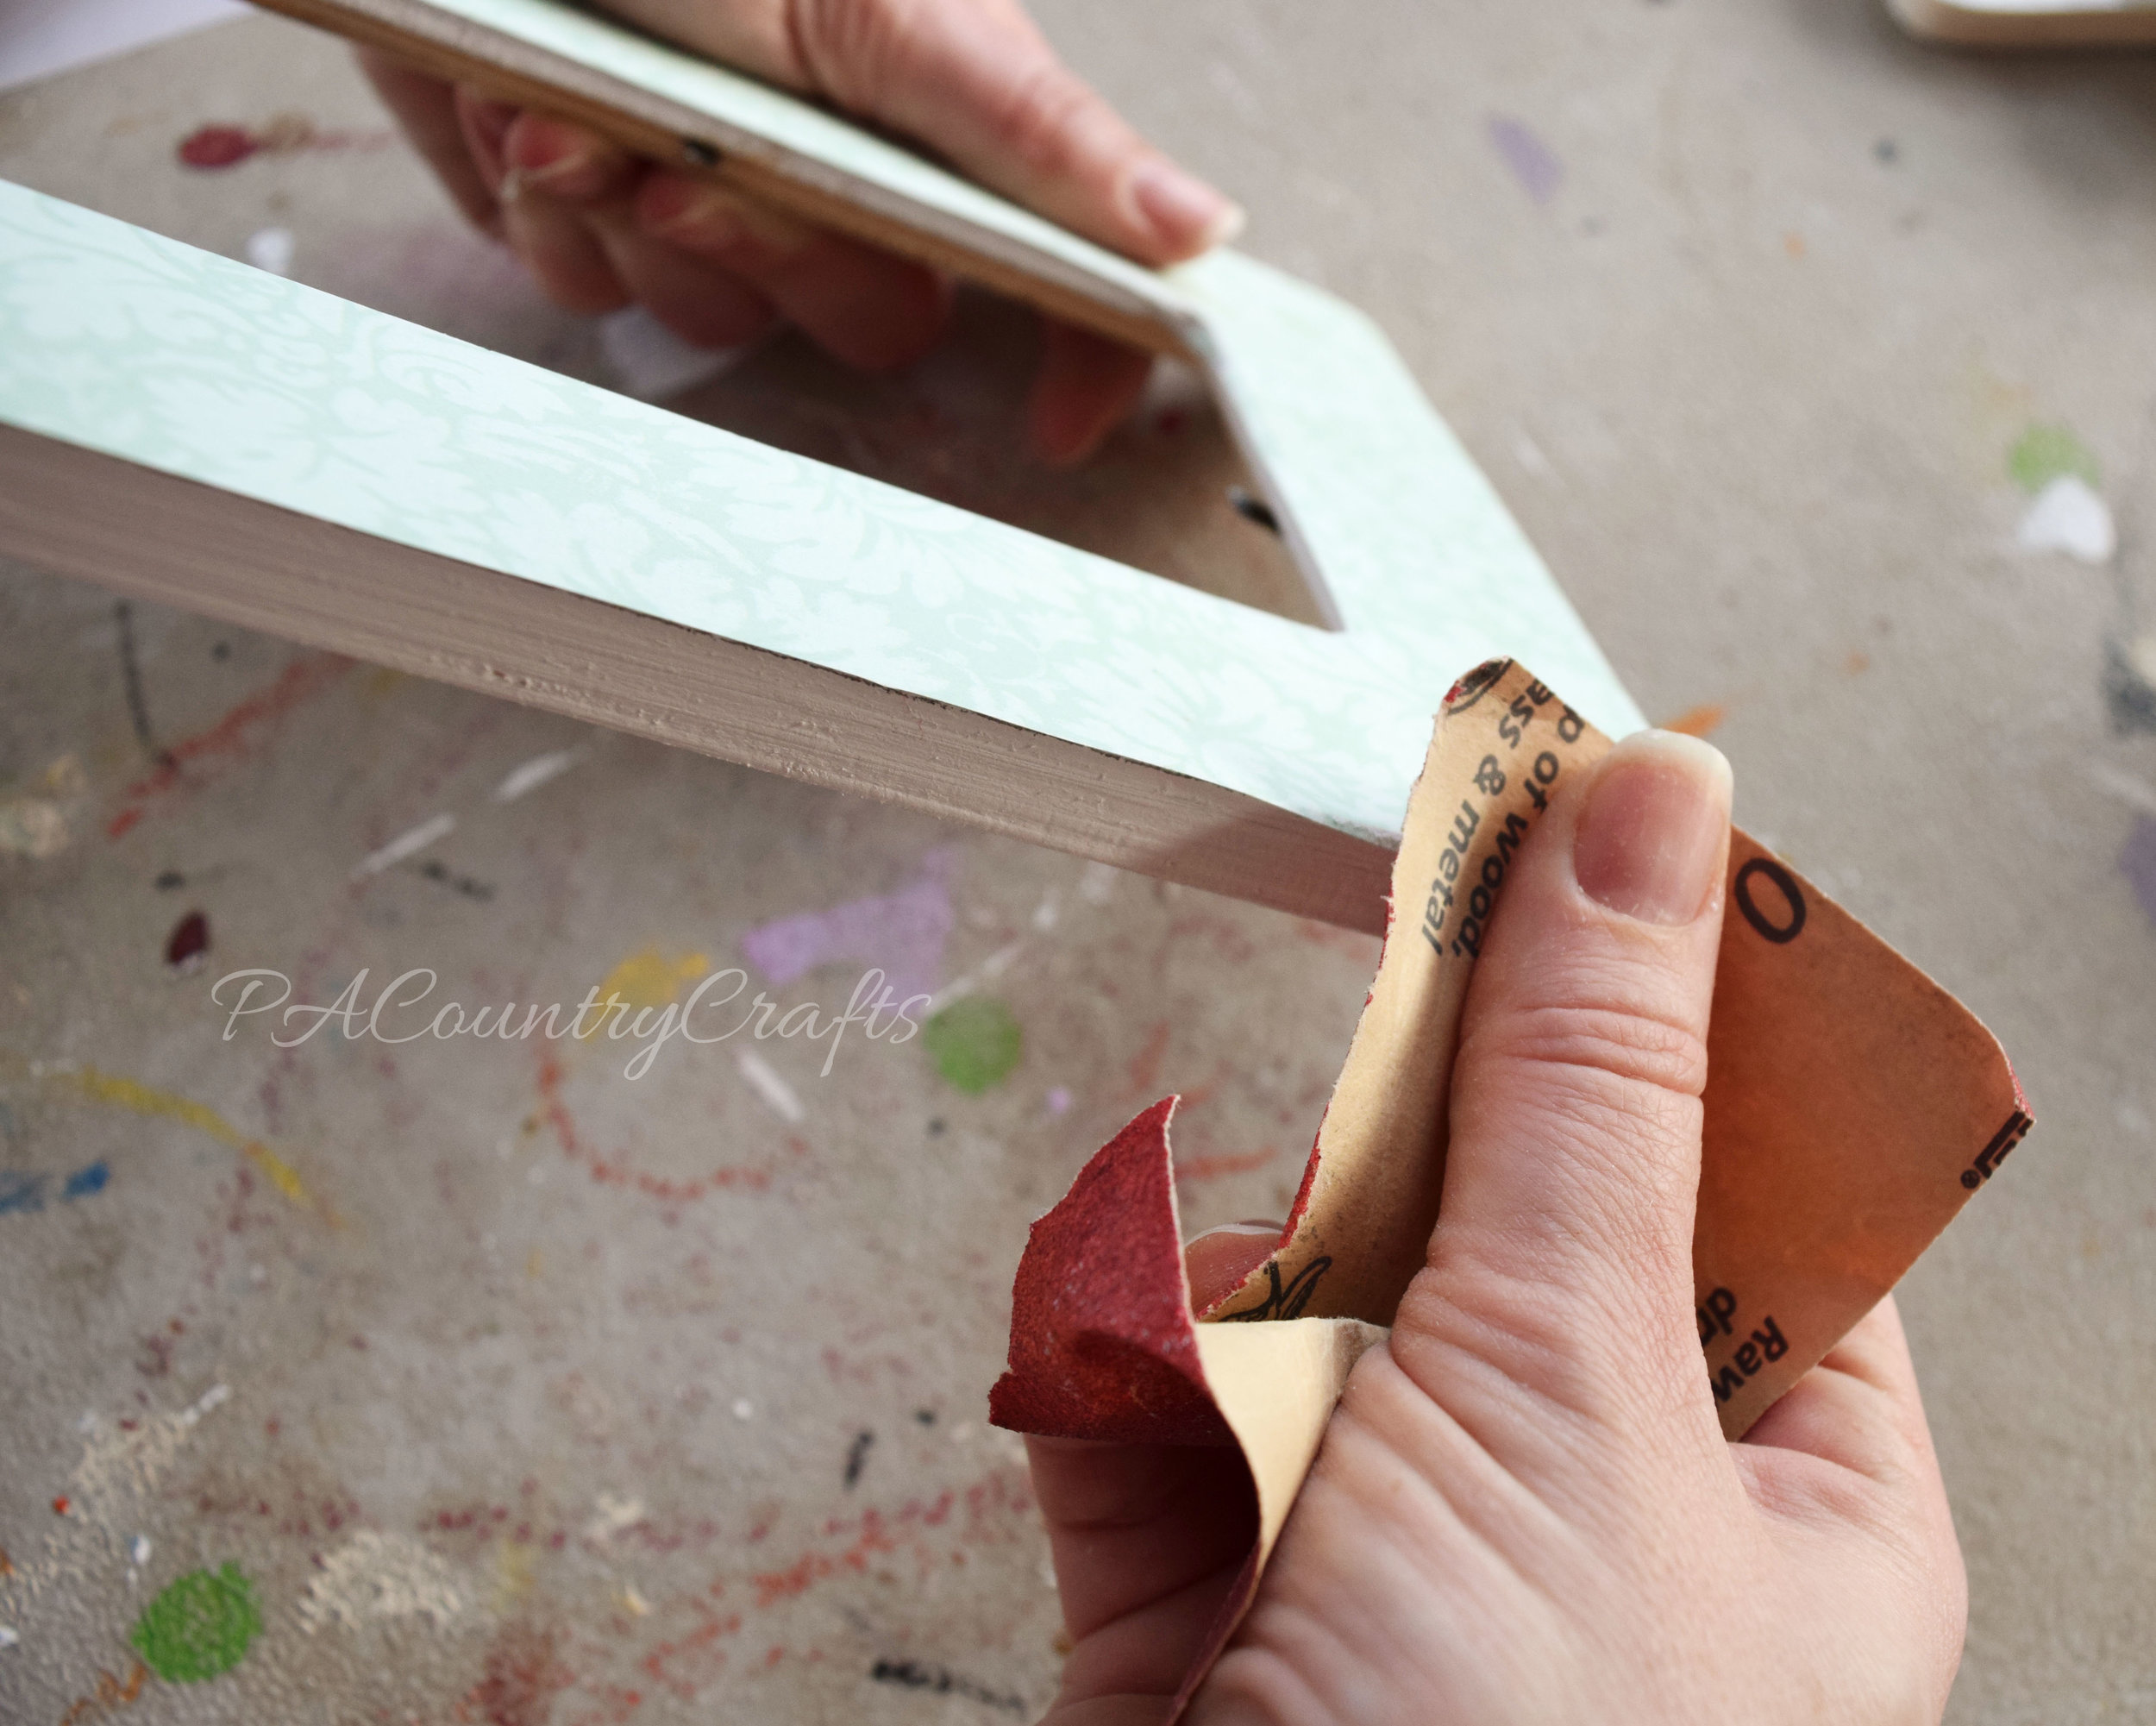 This tip helps you sand extra paper of the edges of mod podge frames for a clean finish.